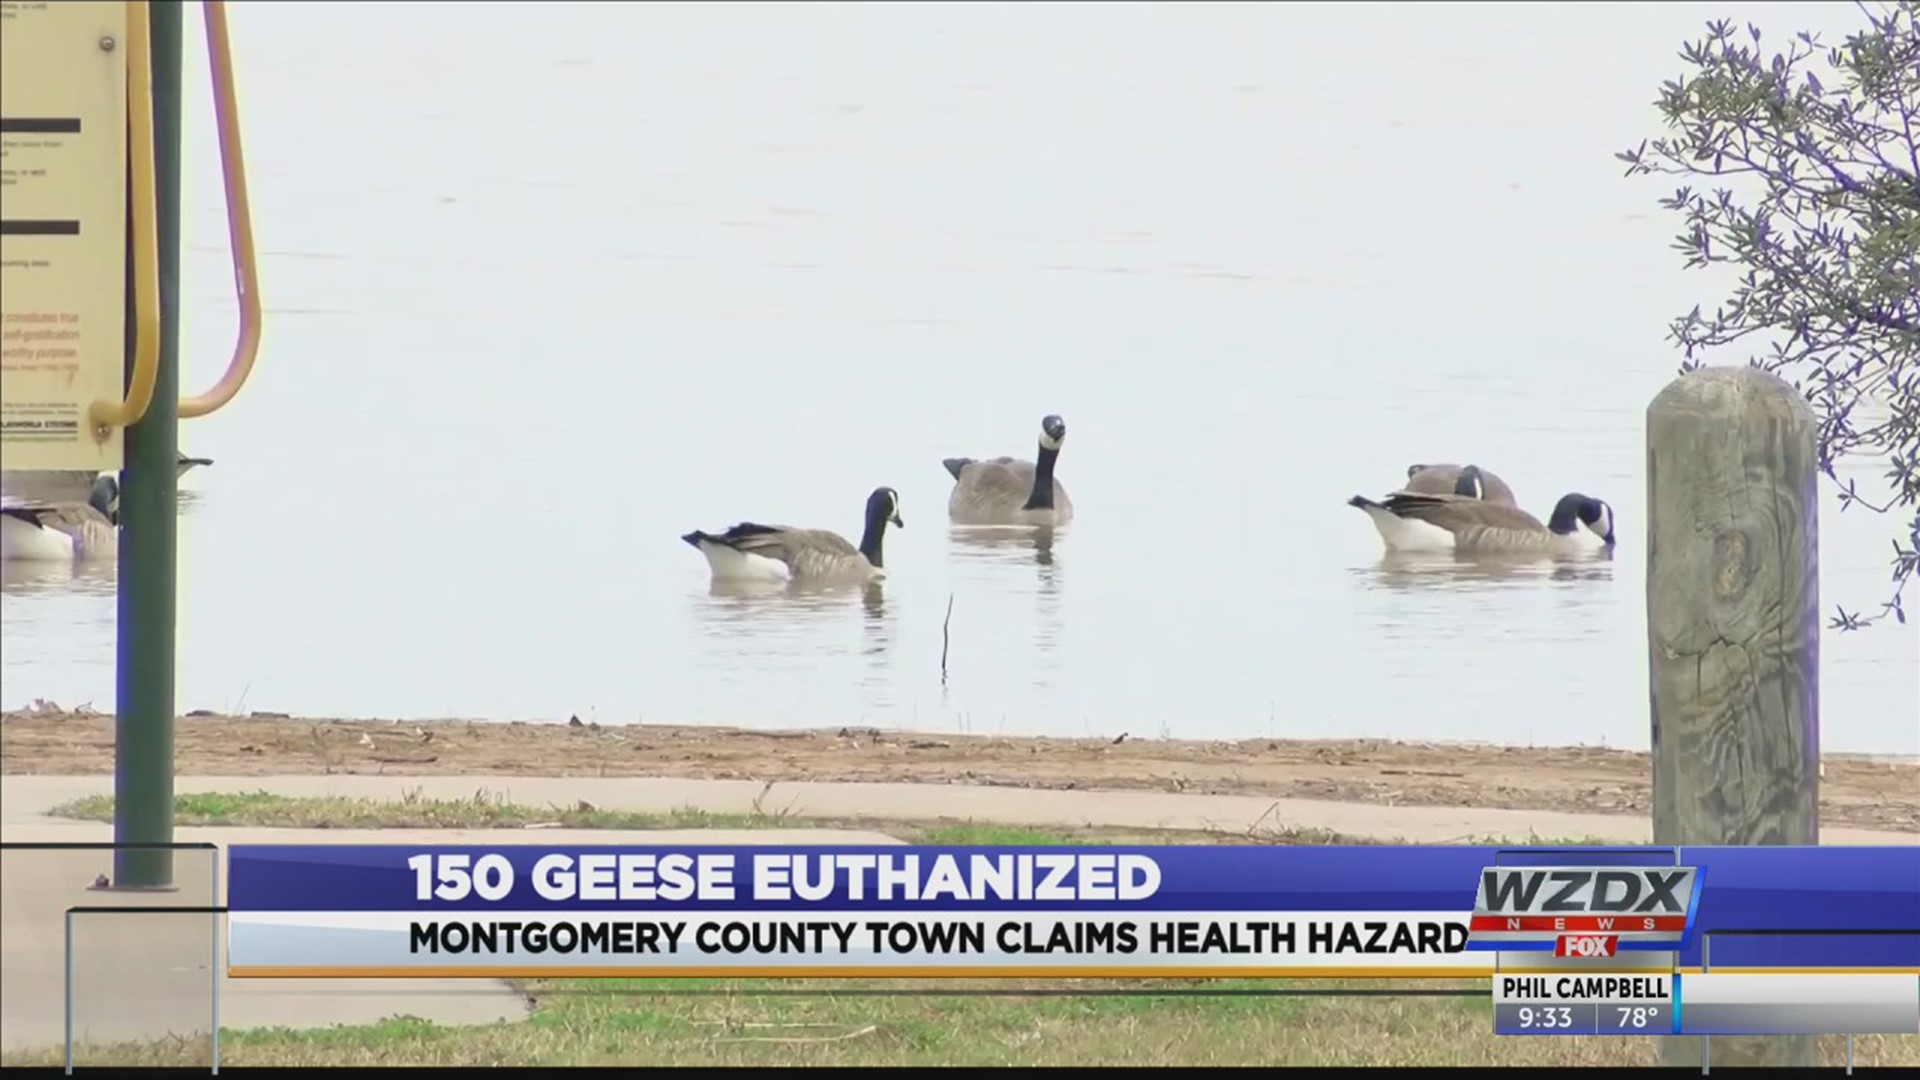 A preponderance of poo ended with the deaths of 150 geese.